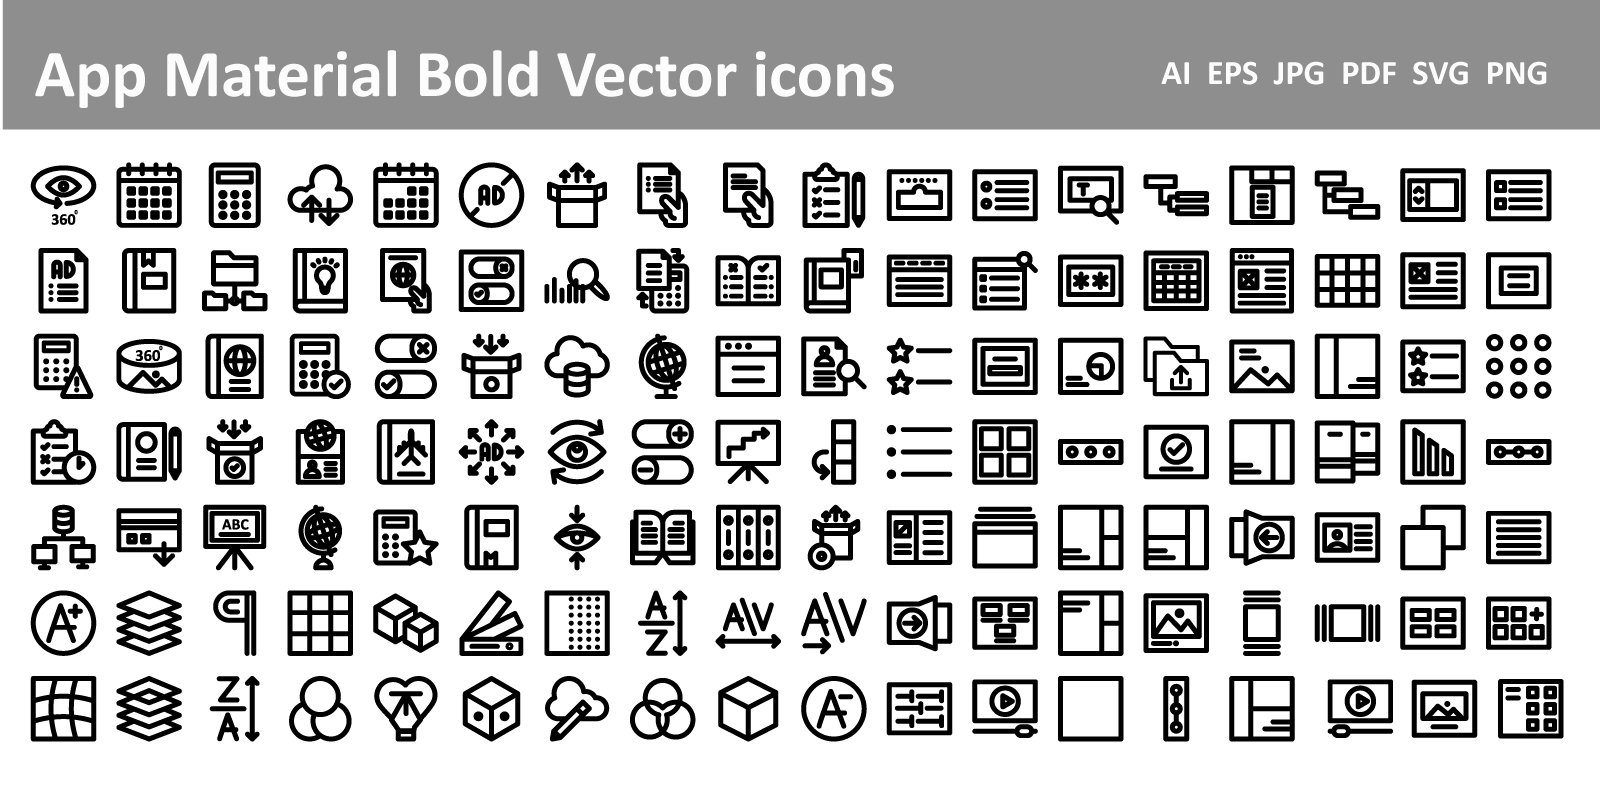 App Material Bold vector icons pack cover image.